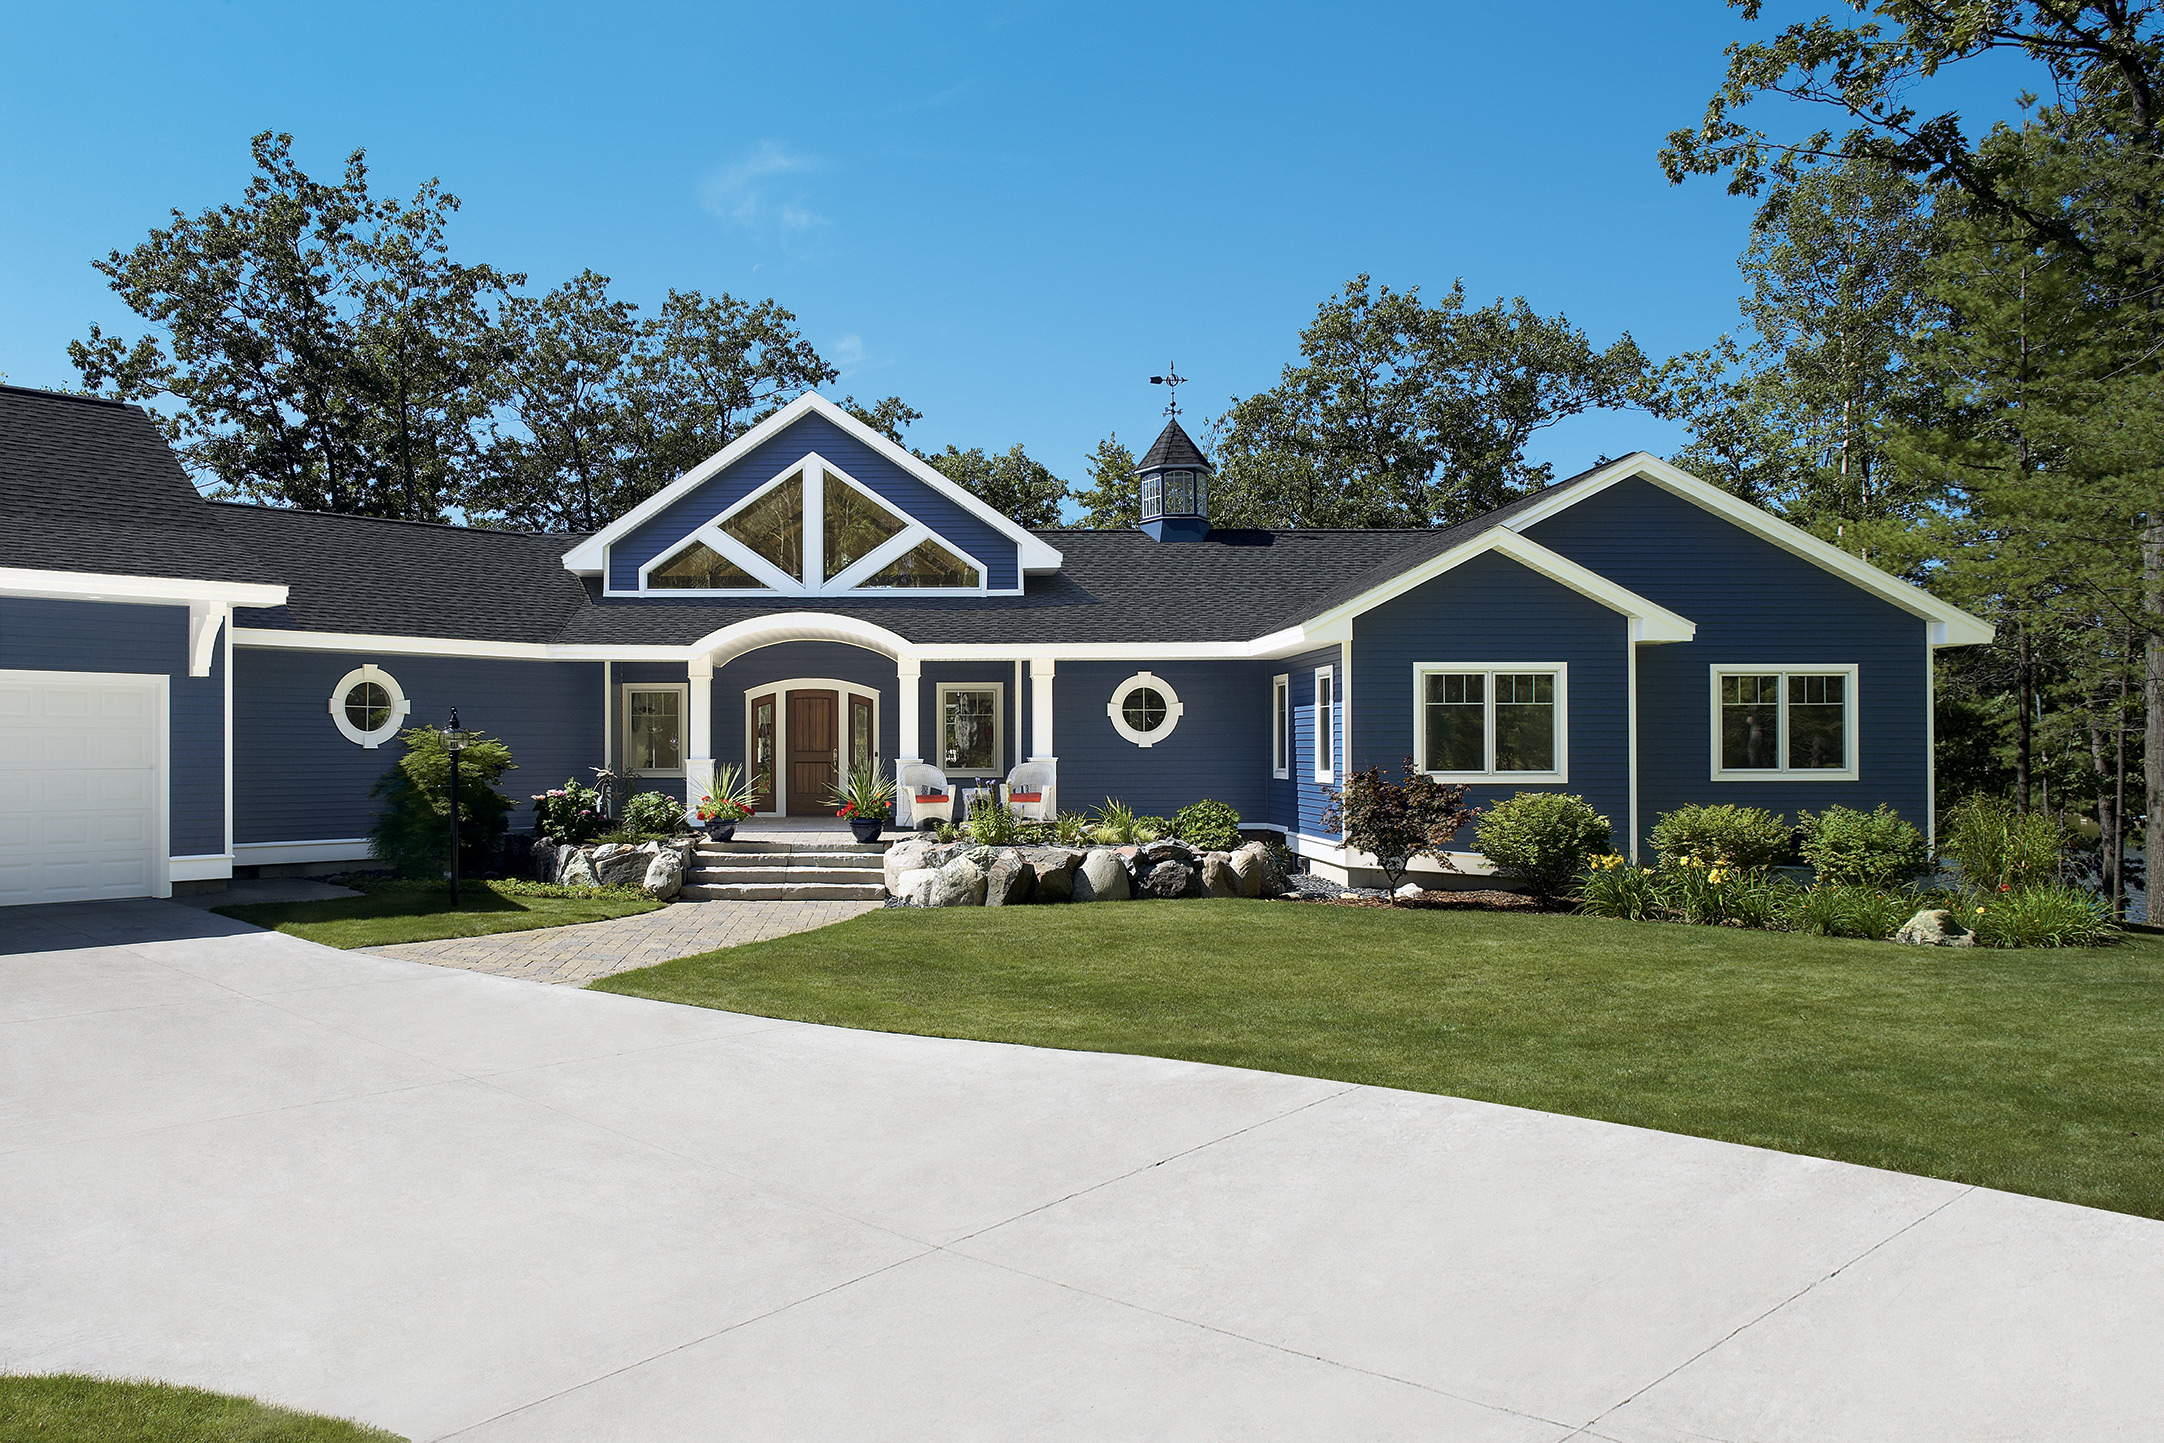 Vinyl Siding Colors For Ranch Homes